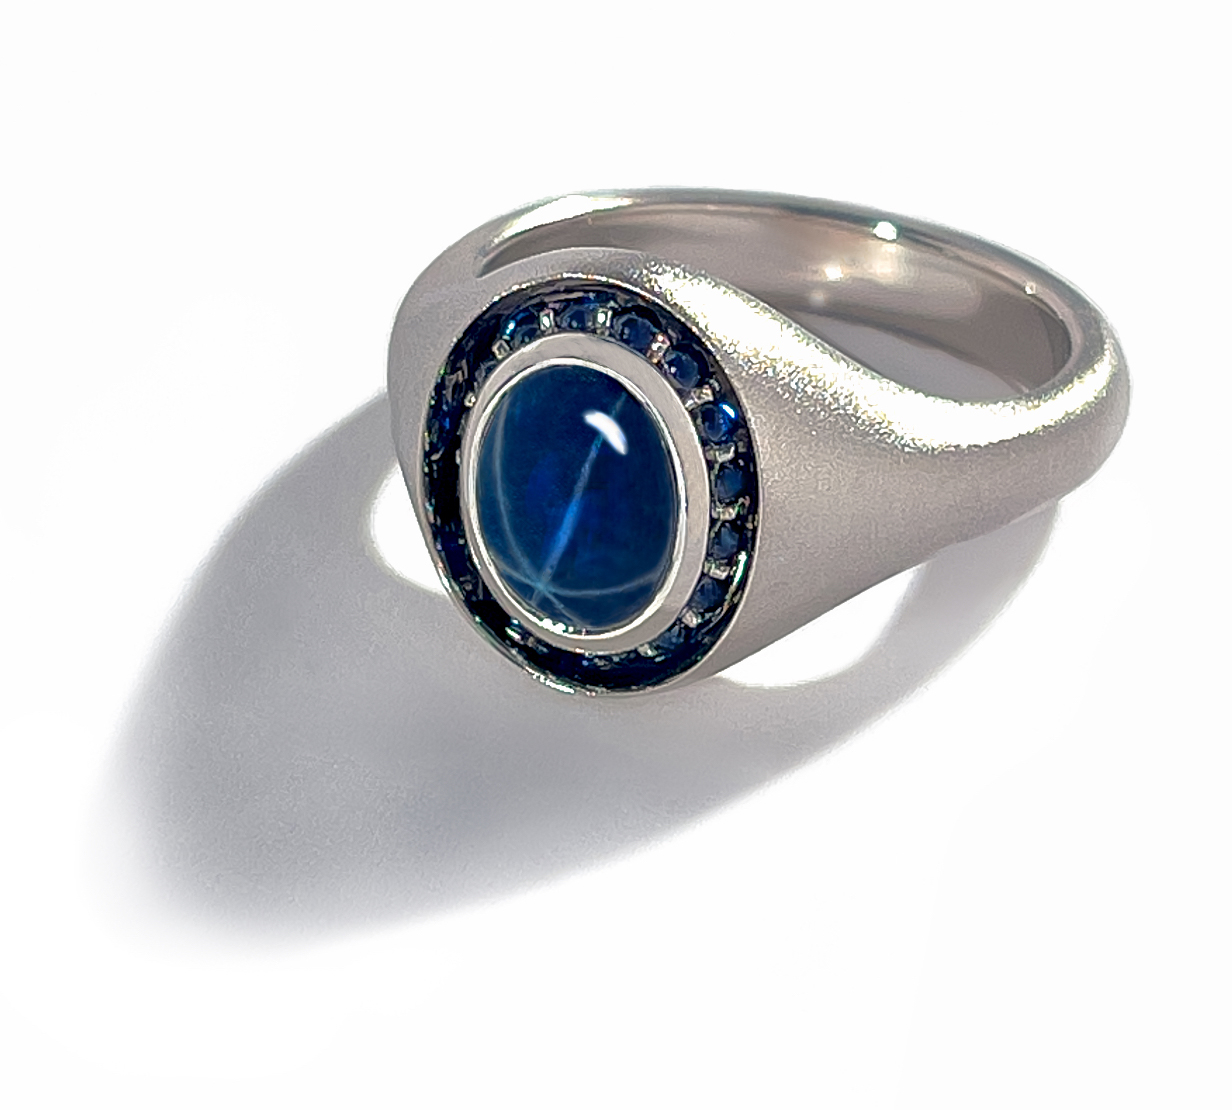 Bespoke Star Sapphire Ring by Geoffrey Good Star Sapphire Cabochon with small sapphire cabochons side-mounted and recessed in an all-platinum ring